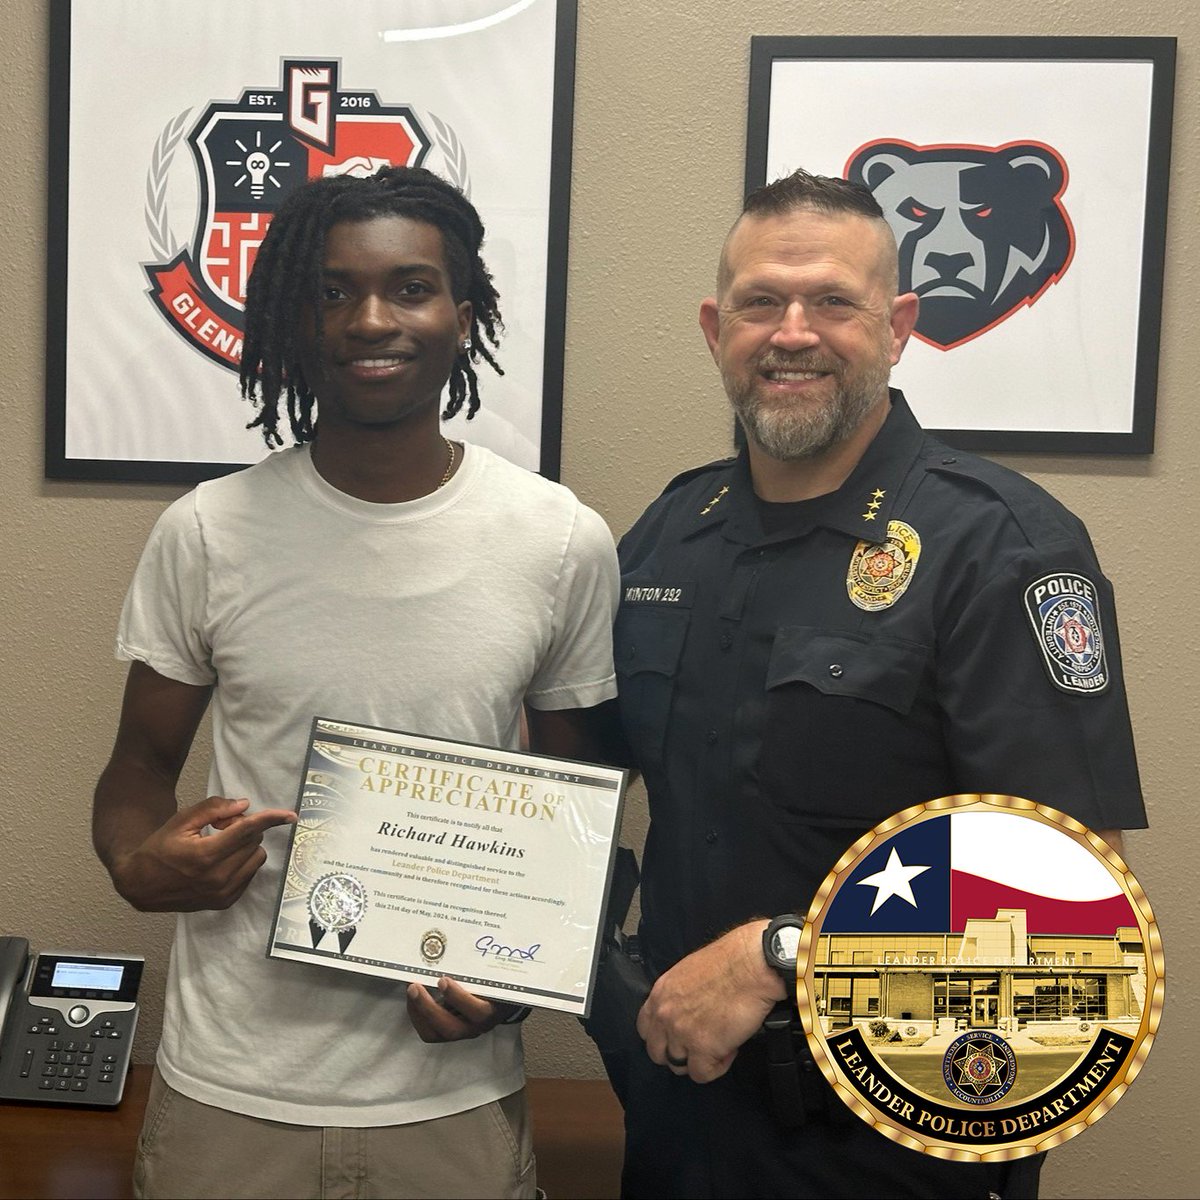 Chief Minton went to Glenn High School today to present Richard Hawkins, a 12-grade student, with a Chief's Coin and a certificate for providing aid to a seriously injured passenger after a recent traffic collision. Well deserved!